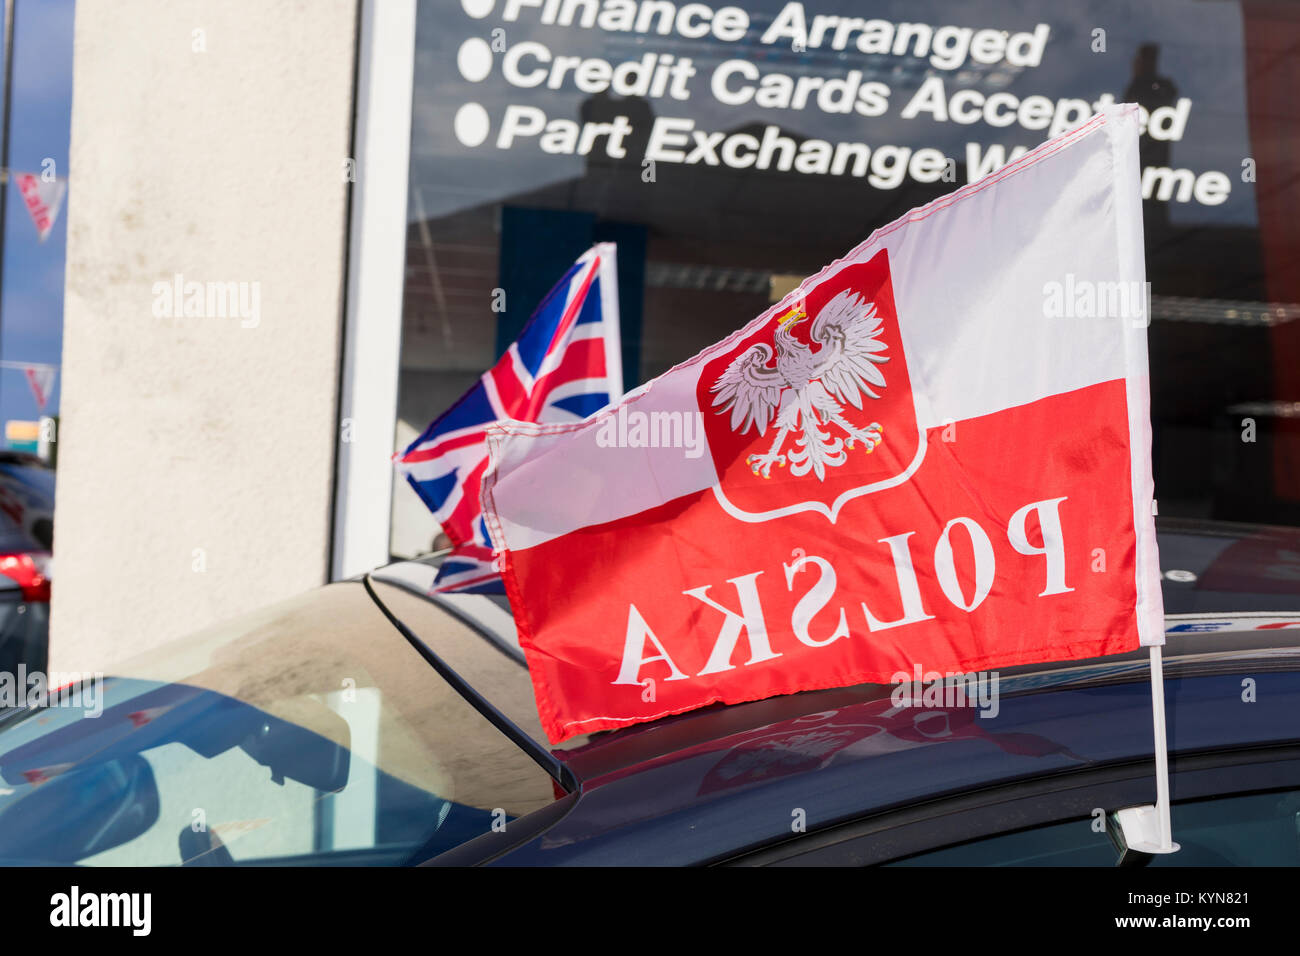 Polish flag with the word 'polska' written on it in reverse and a Union Jack flag in the background Stock Photo